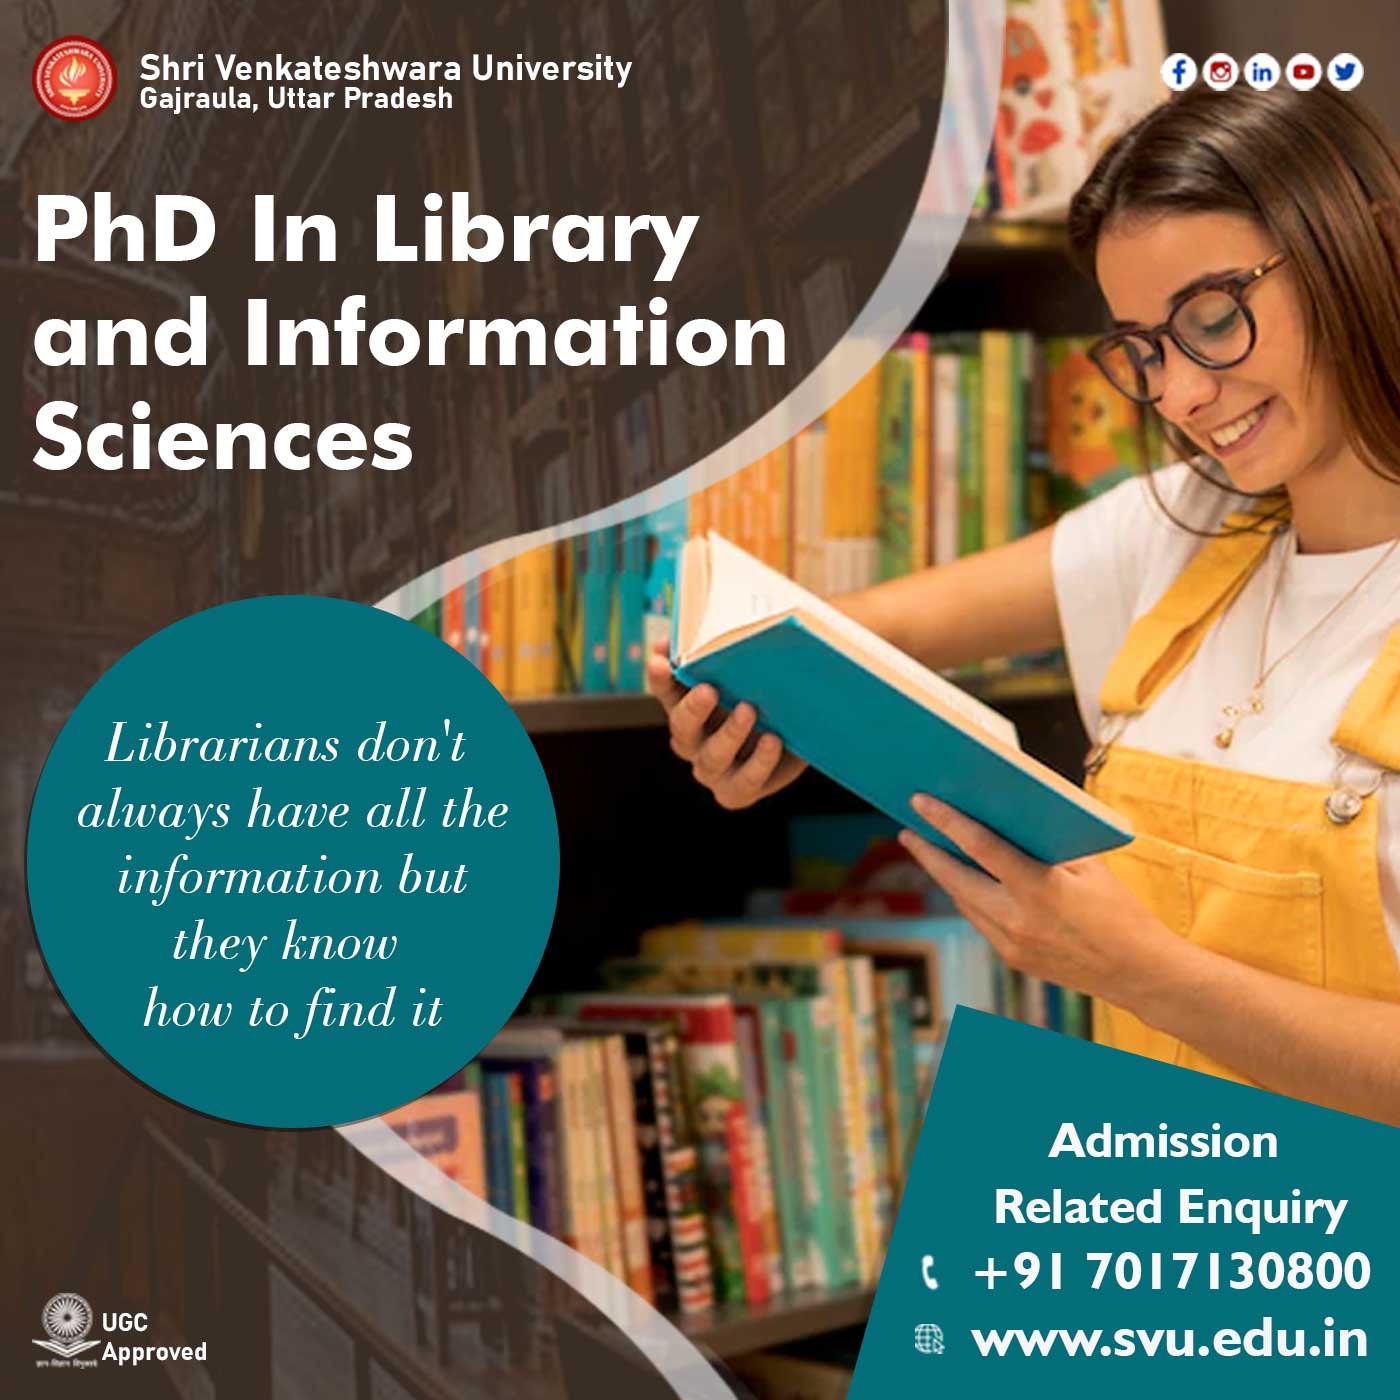 Ph.D Library Sciences